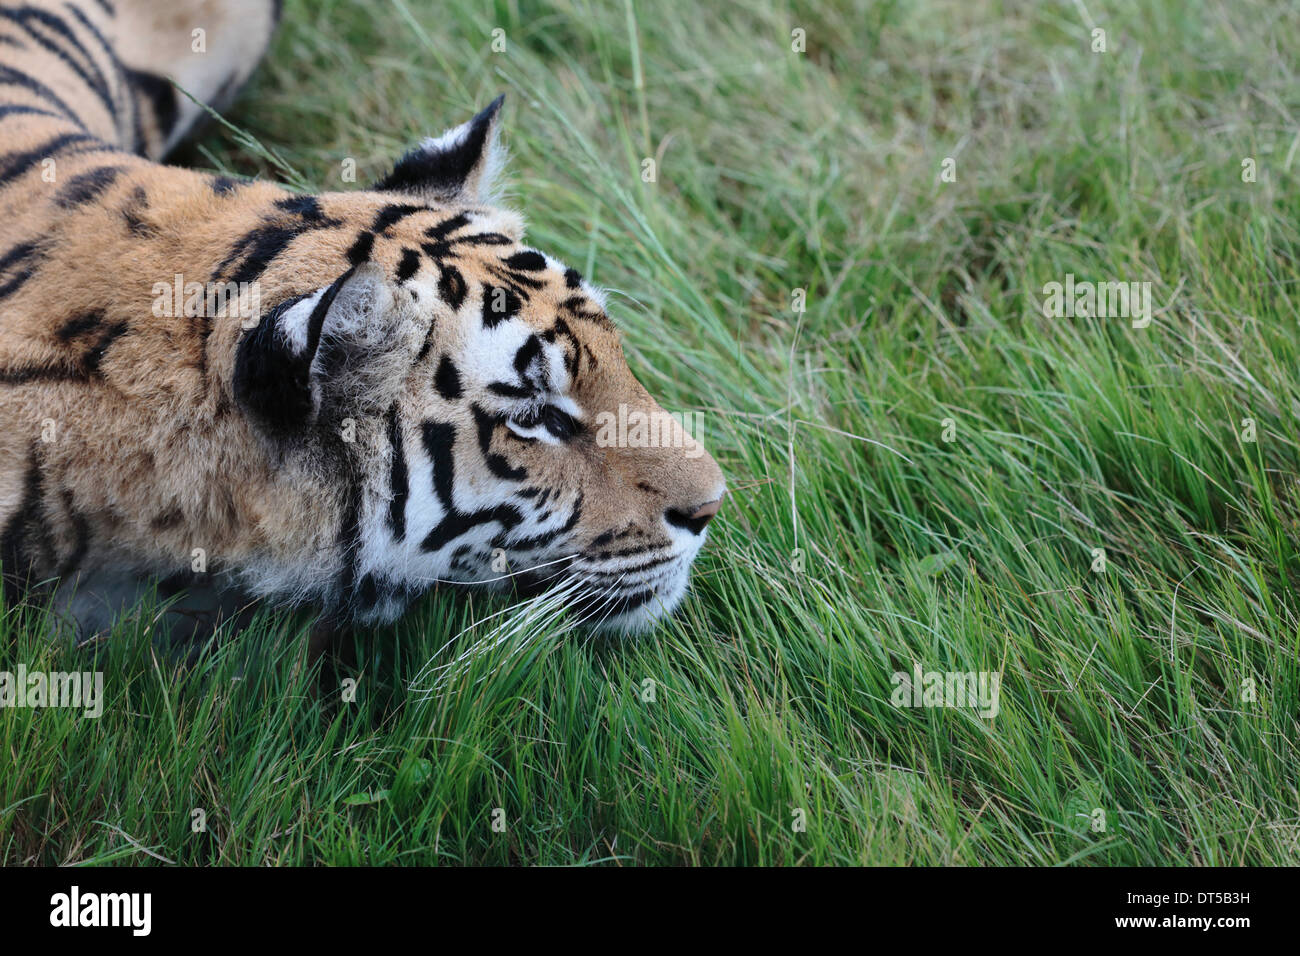 Bengal tiger stalking in the grass Stock Photo